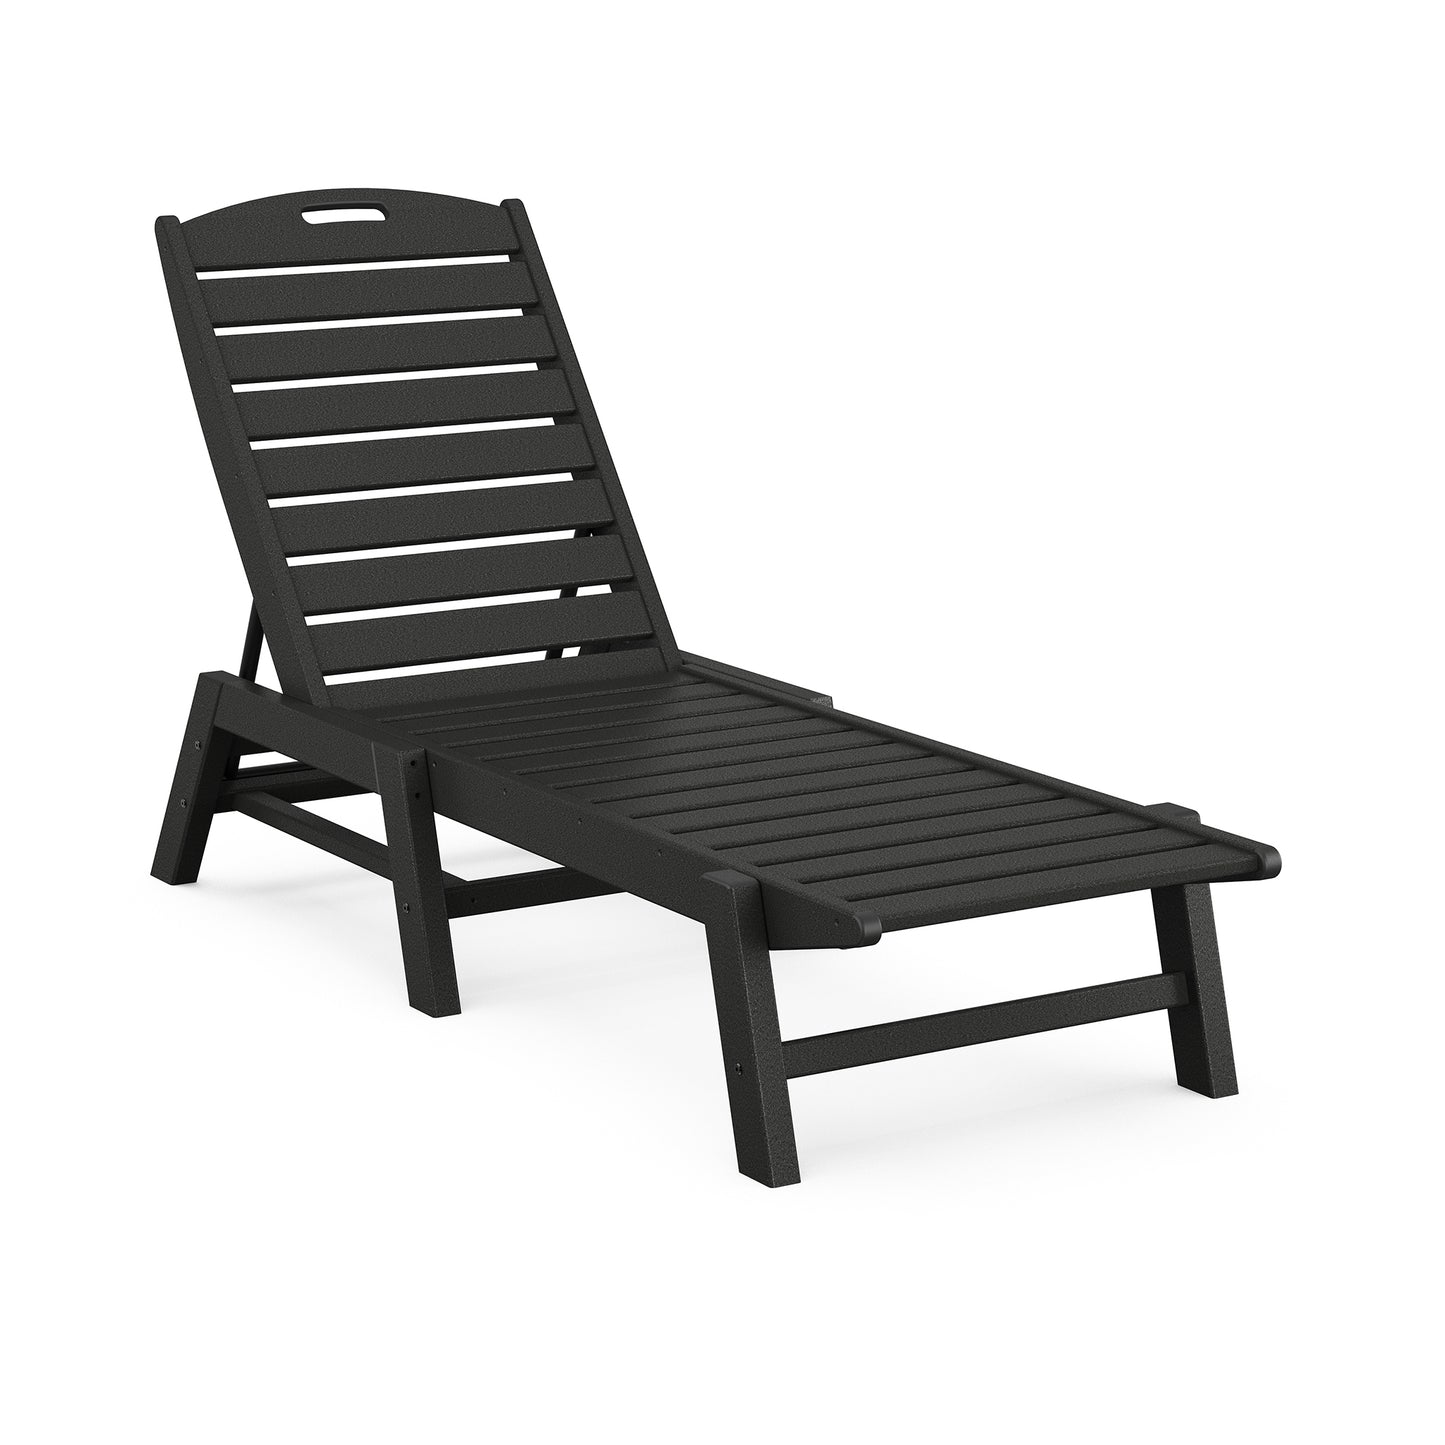 A black POLYWOOD Nautical Armless Chaise Lounge made of eco-friendly recycled plastic, featuring a slatted design and adjustable backrest, isolated on a white background.